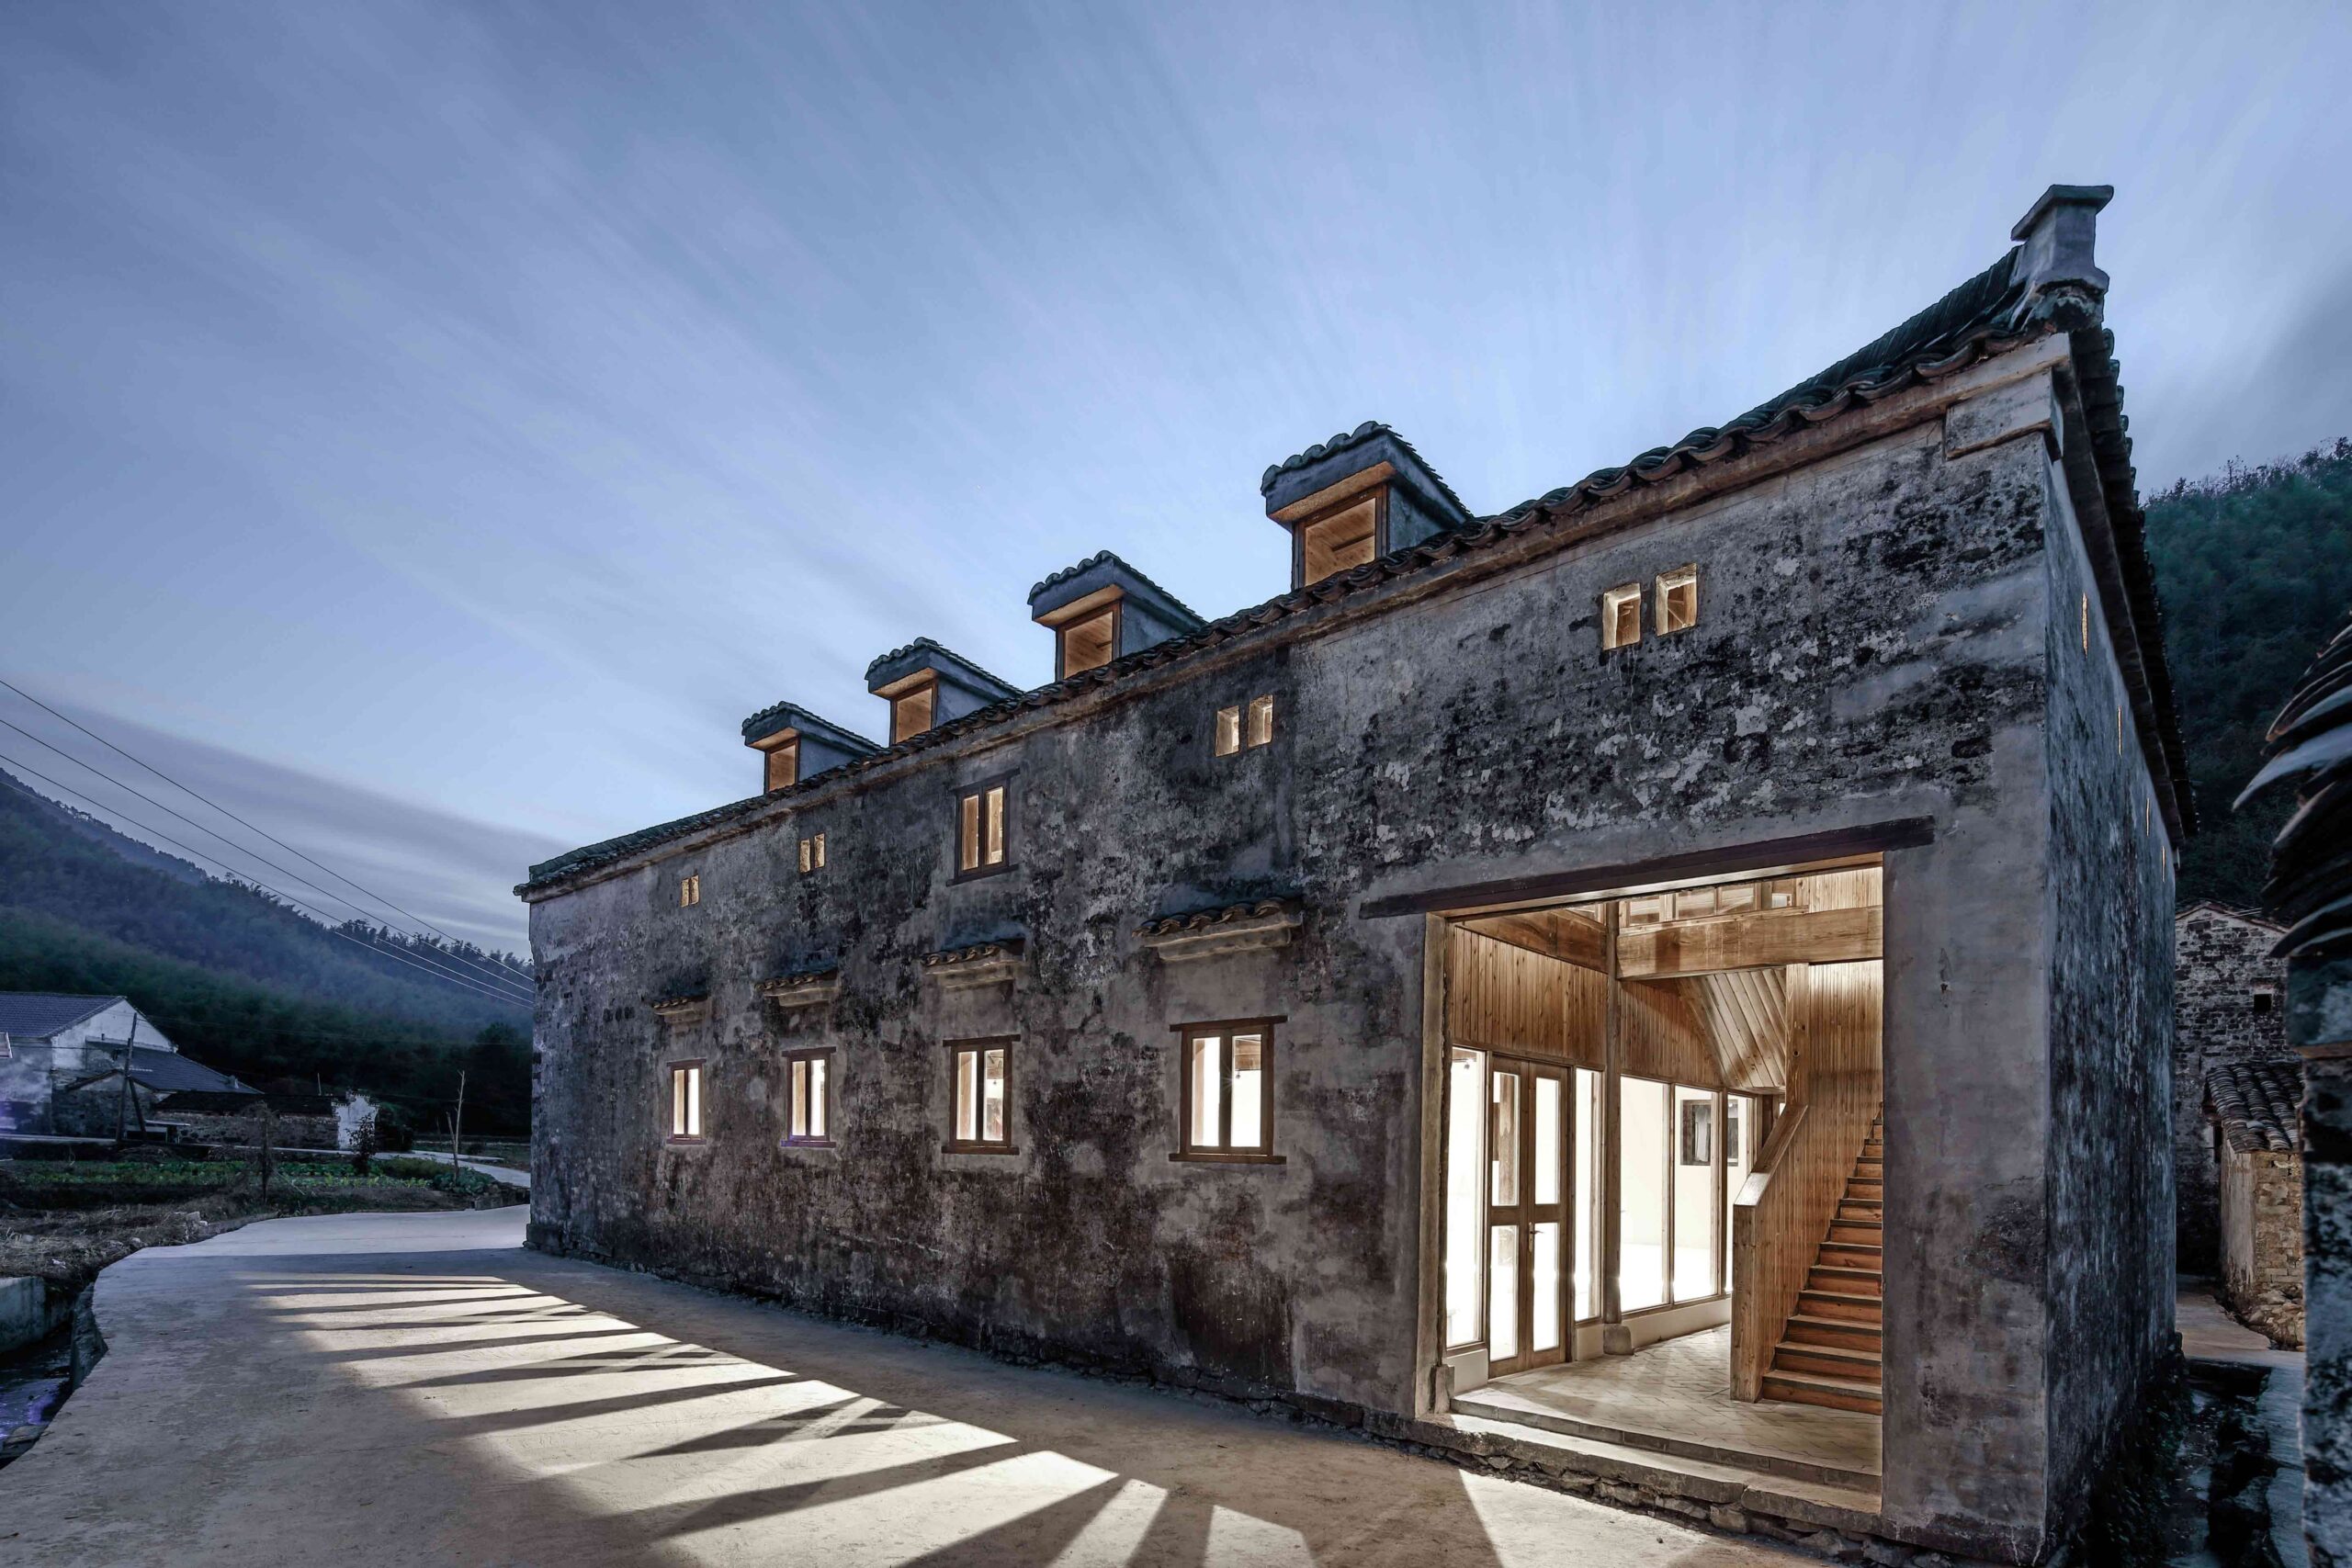 History museum of Qifeng Village by SUP Atelier of THAD